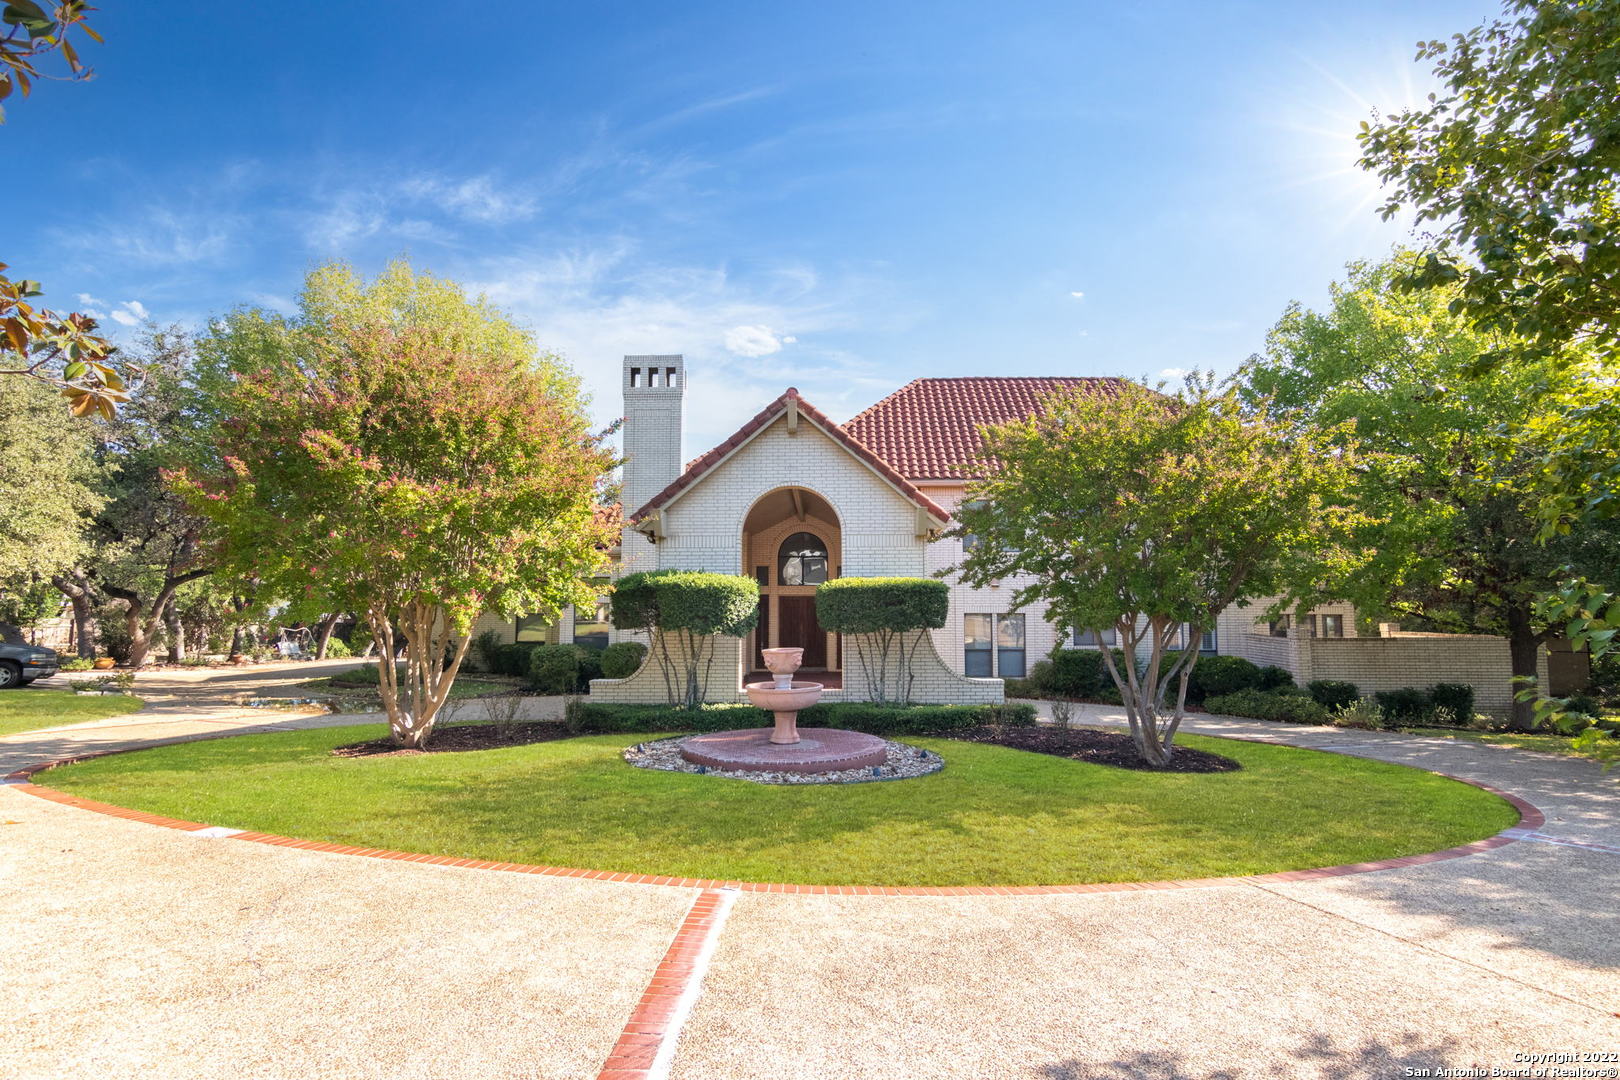 Gorgeous Estate in Gated Community on 1.4 acres in Corner Cul de sac. Grand Entry with 25' ceilings leading to Formal Living Room w/fireplace & Dining Room. Stunning Kitchen with Granite countertops, island, & a built-in desk. Elegant Family Room w/Fireplace & Wet Bar overlooking Beautifully landscaped yard w/heated pool/spa/diving board/patio area. Astounding Master Bedroom w/sitting area, built-in shelves, fireplace, and 2-walk in closets. Spacious Game room w/Wet Bar leading out to covered deck and large balcony. Backyard is set up to entertain with a Deck area surrounded by mature trees. There is Crown Molding and Custom Built shelving throughout entire home. Truly this home has so many unique features. Come tour today!